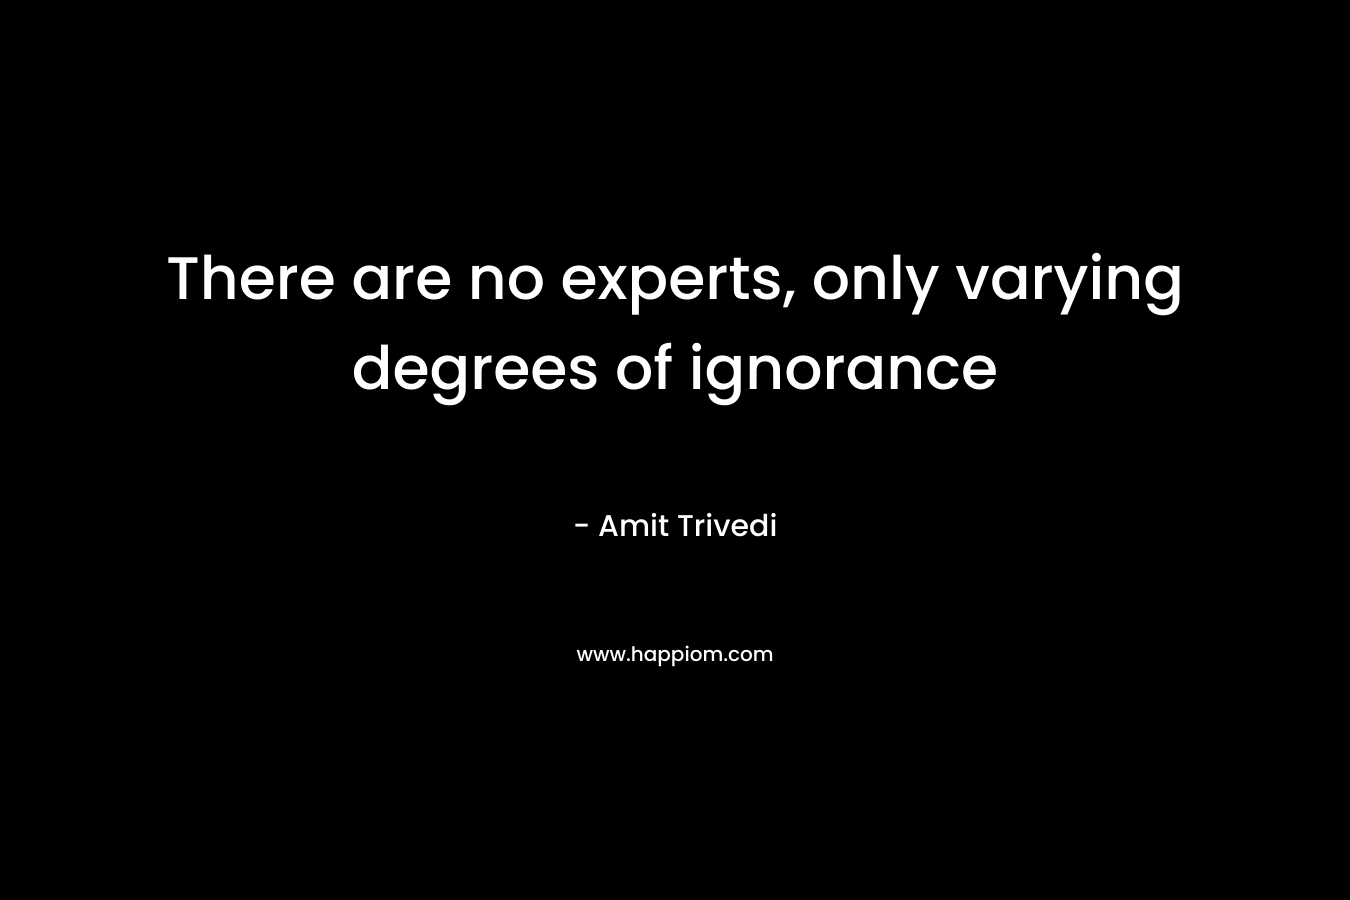 There are no experts, only varying degrees of ignorance